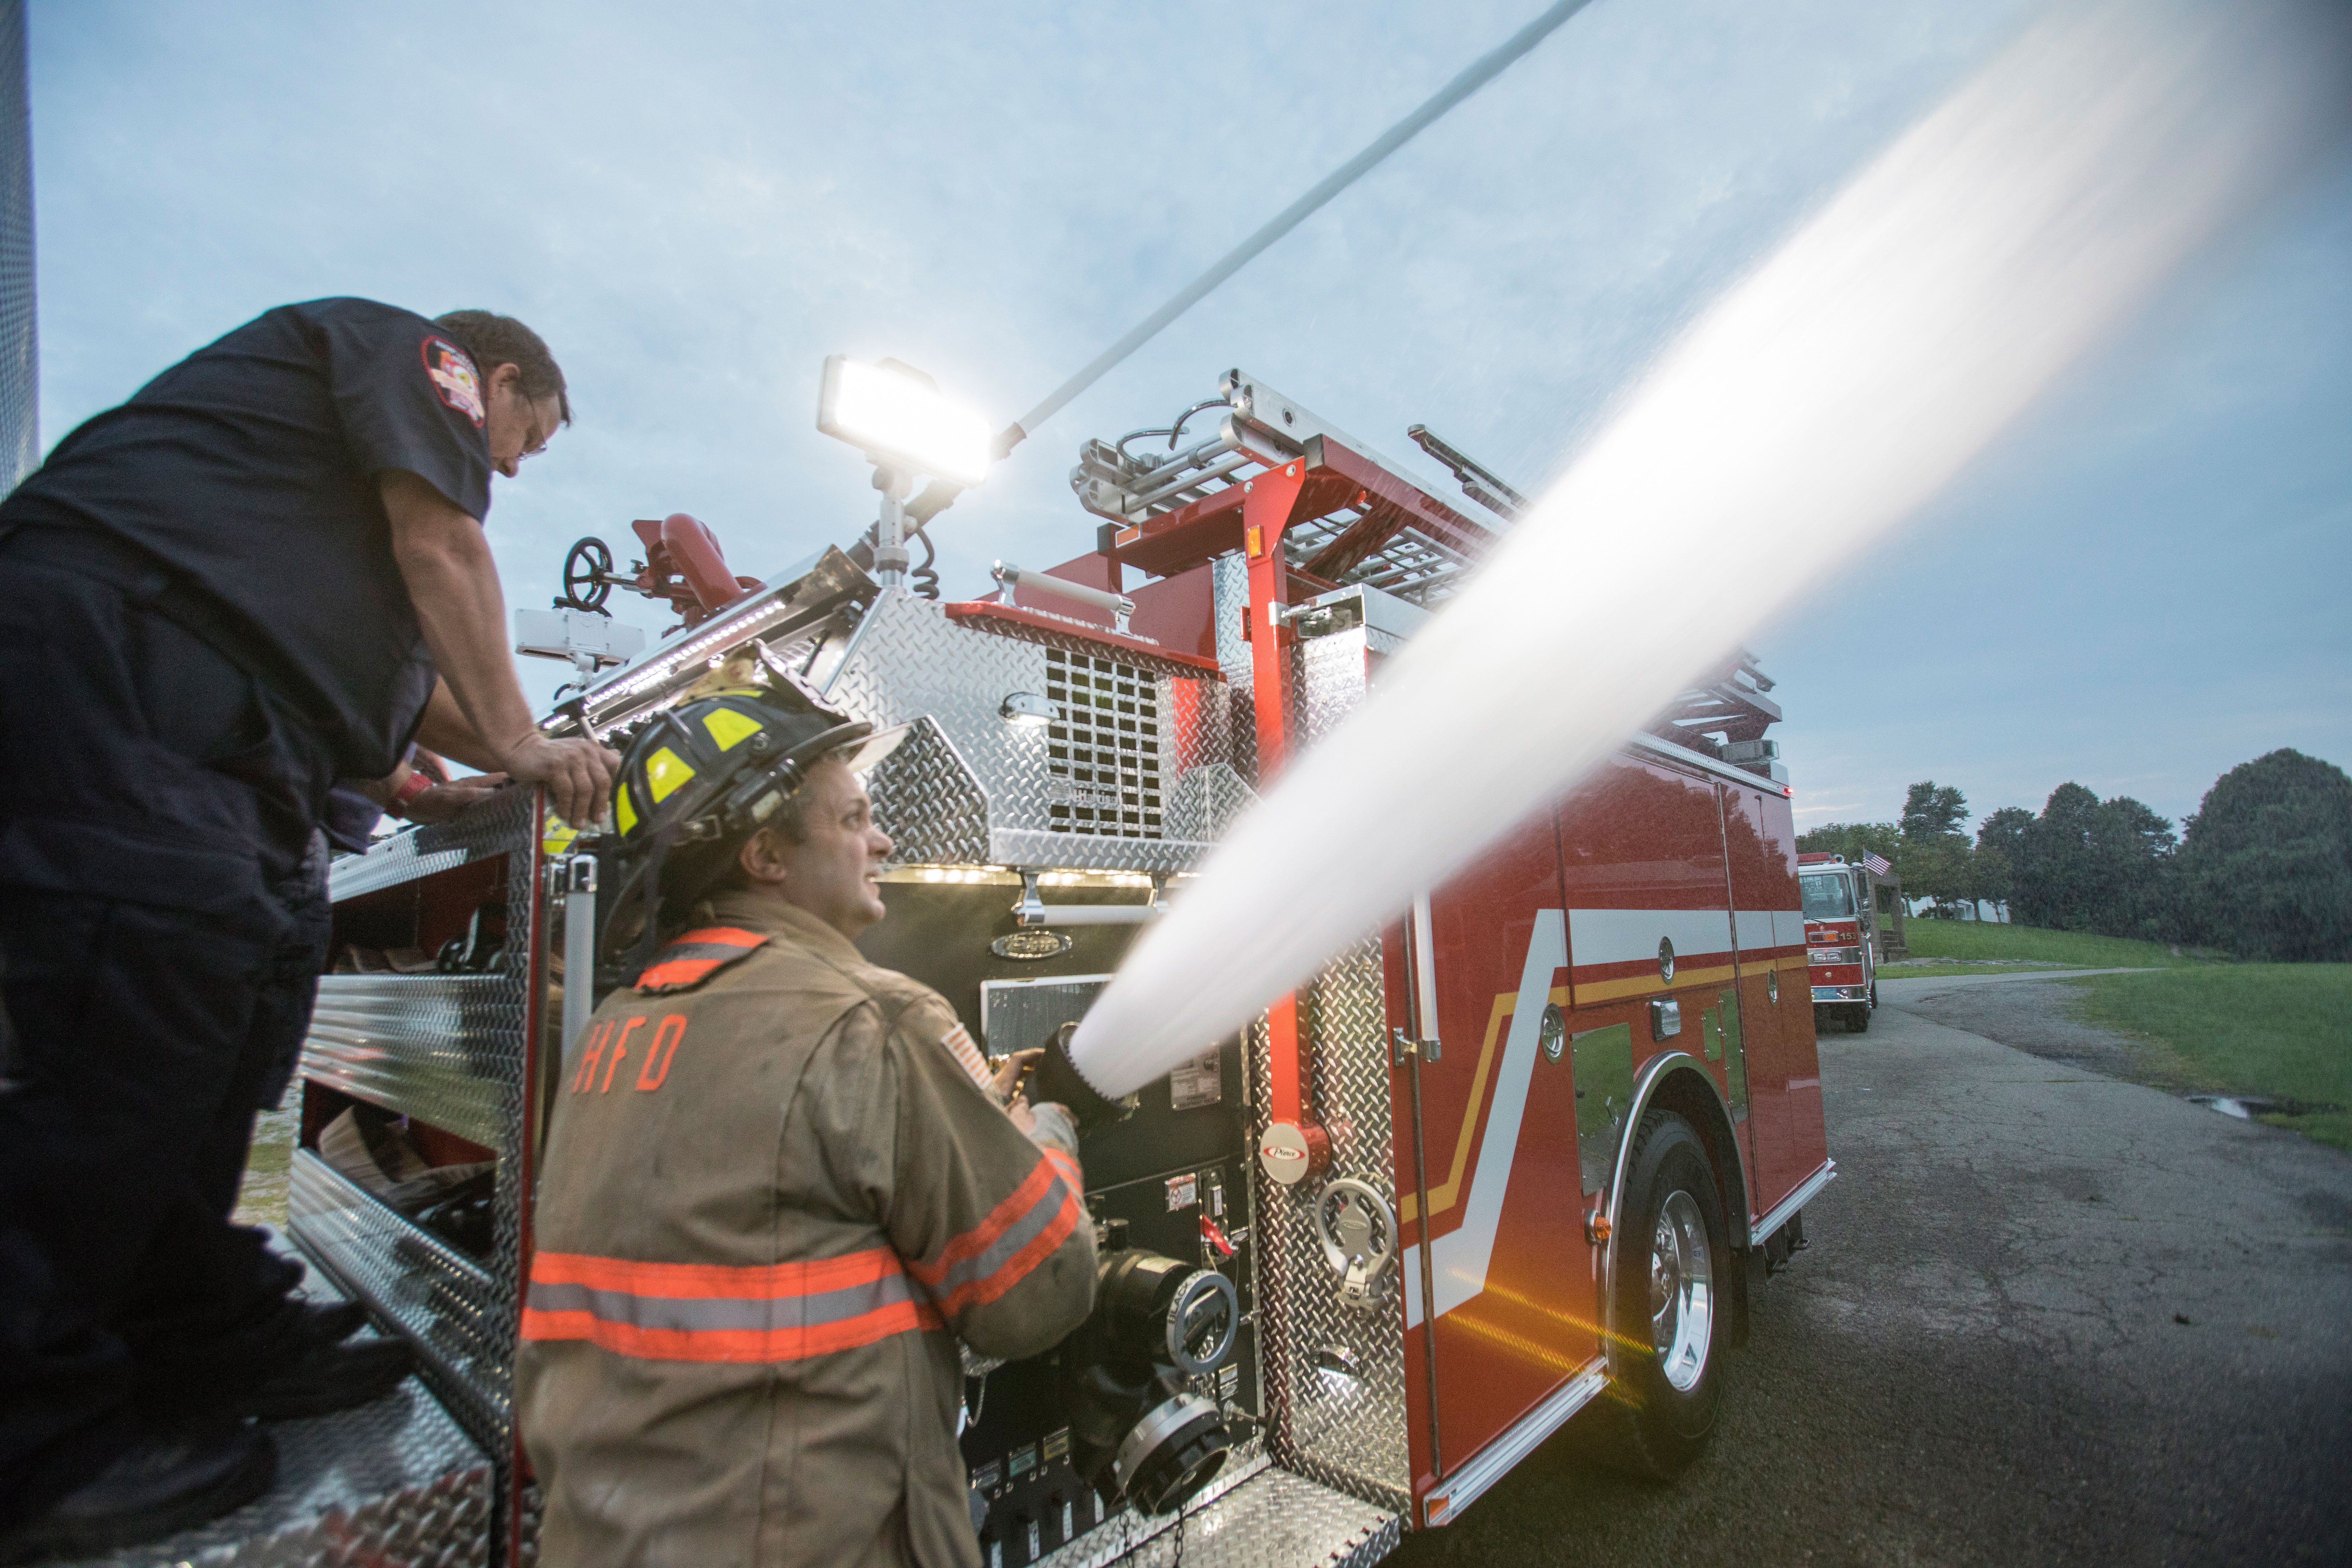 Two Firefighters pumping water from a top mounted pump panel on a Pierce Pumper Fire Truck parked outside.  